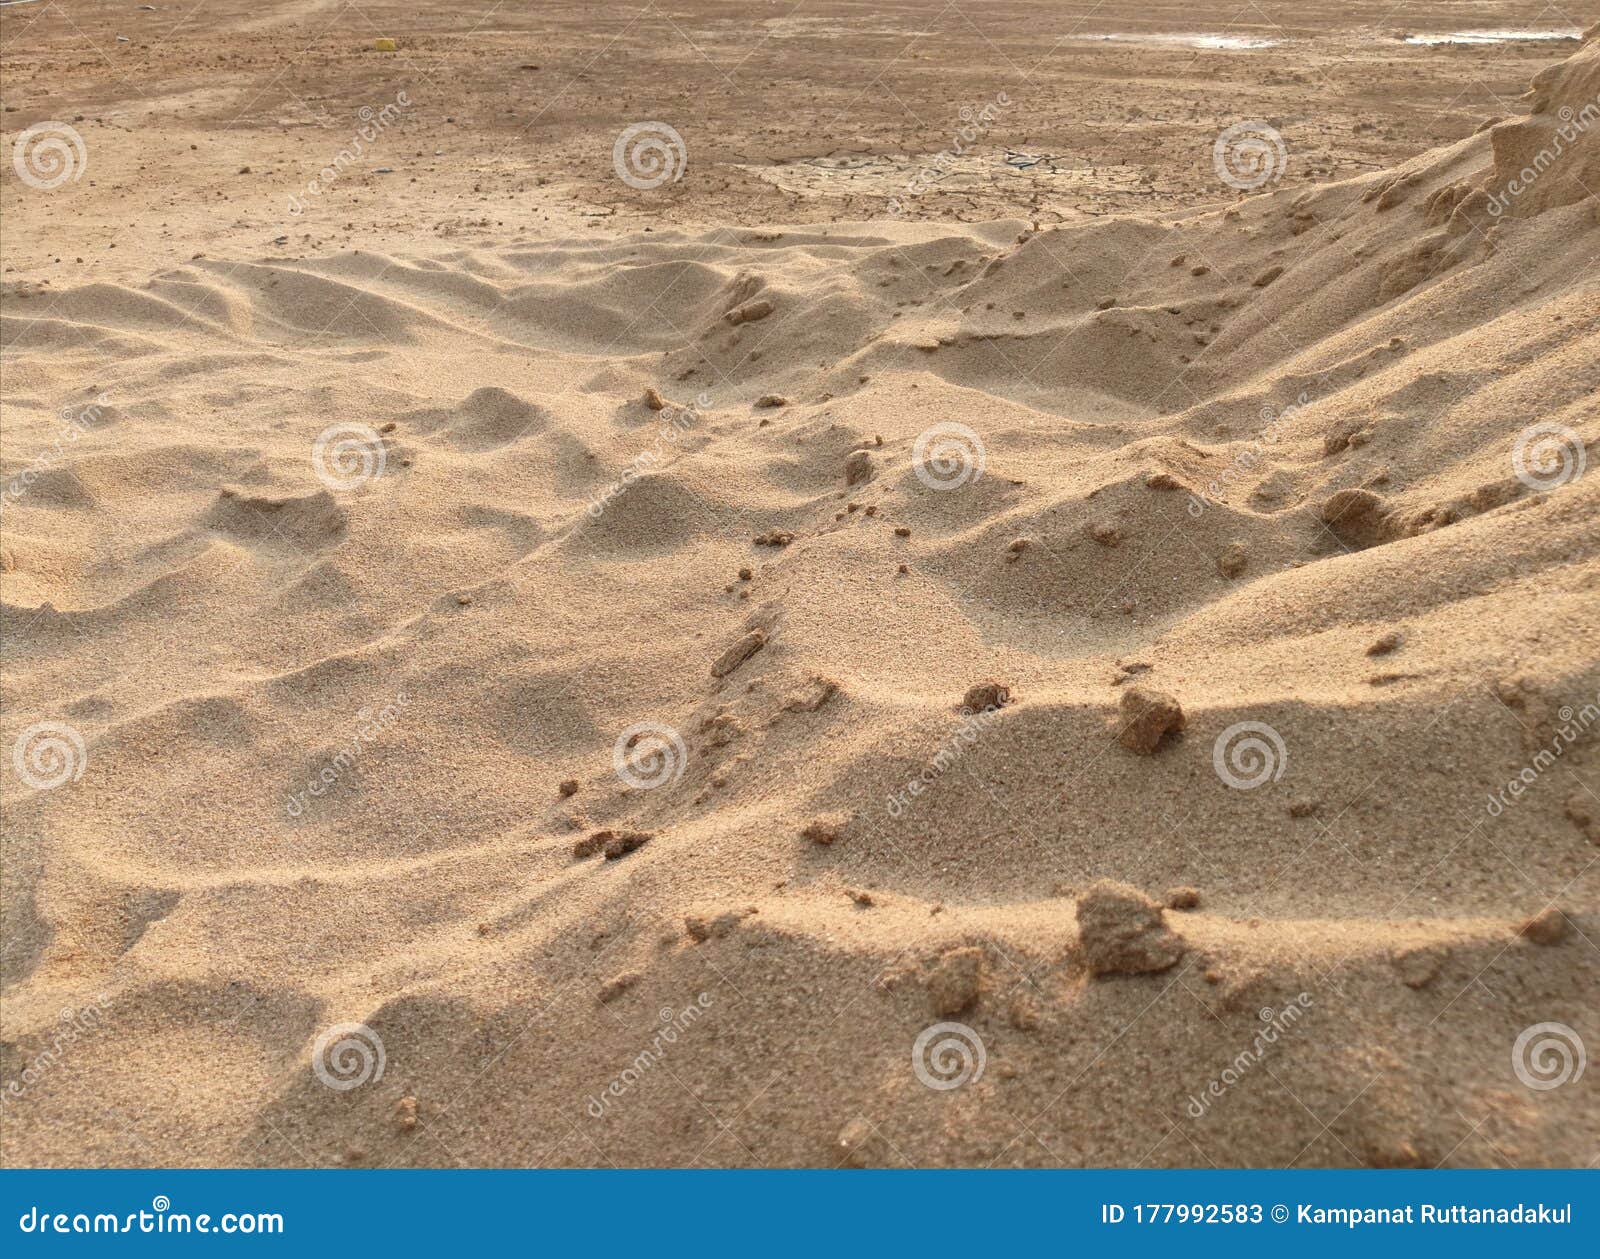 Earth In The Desert And The Surface Of Fine Sand Stock Image Image Of Fine Sand